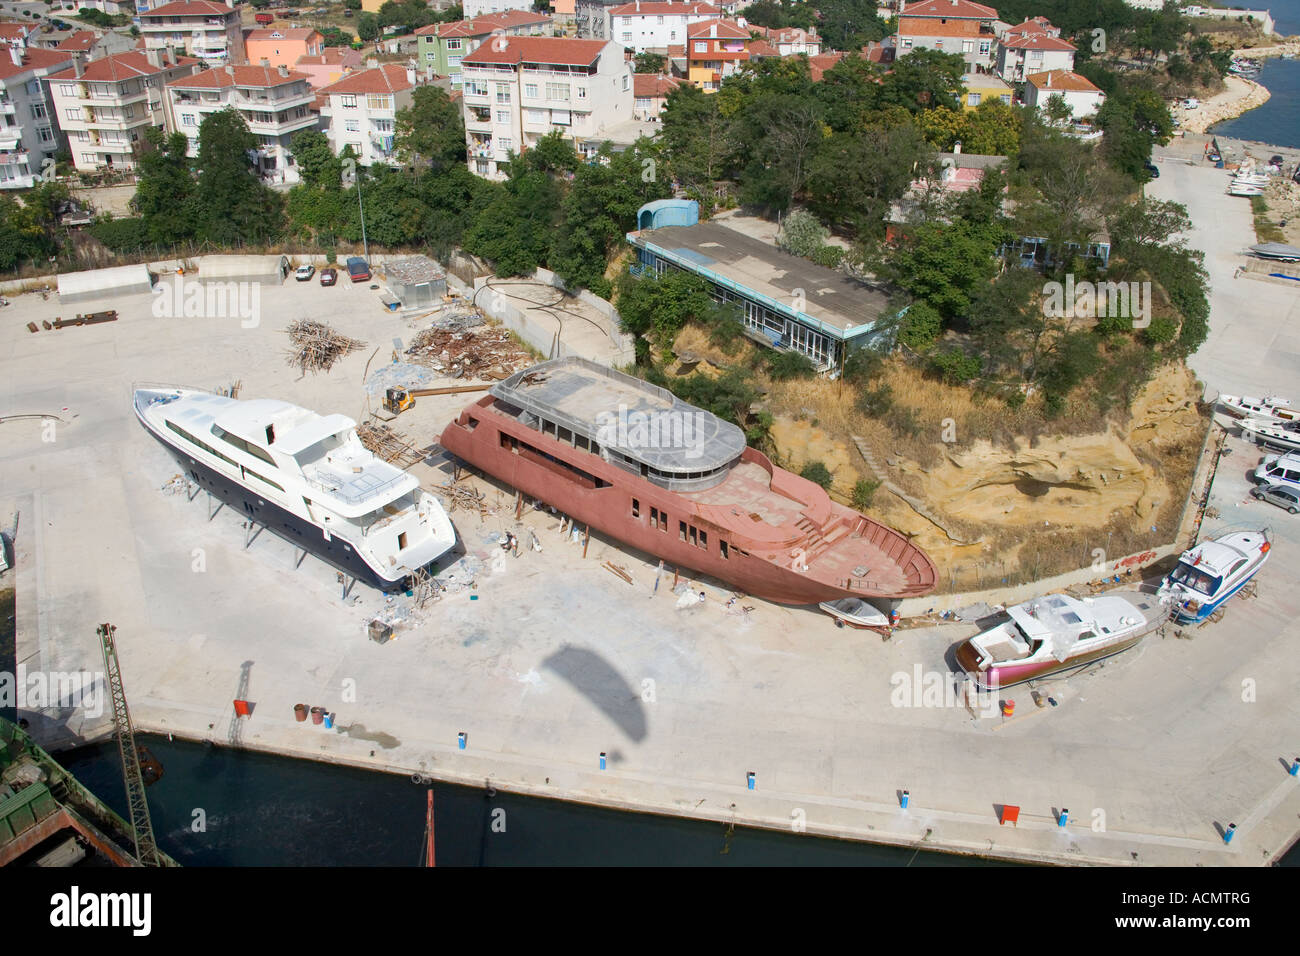 Yachts being built or repaired aerial Buyukcekmece Soutwest of Istanbul Turkey Stock Photo